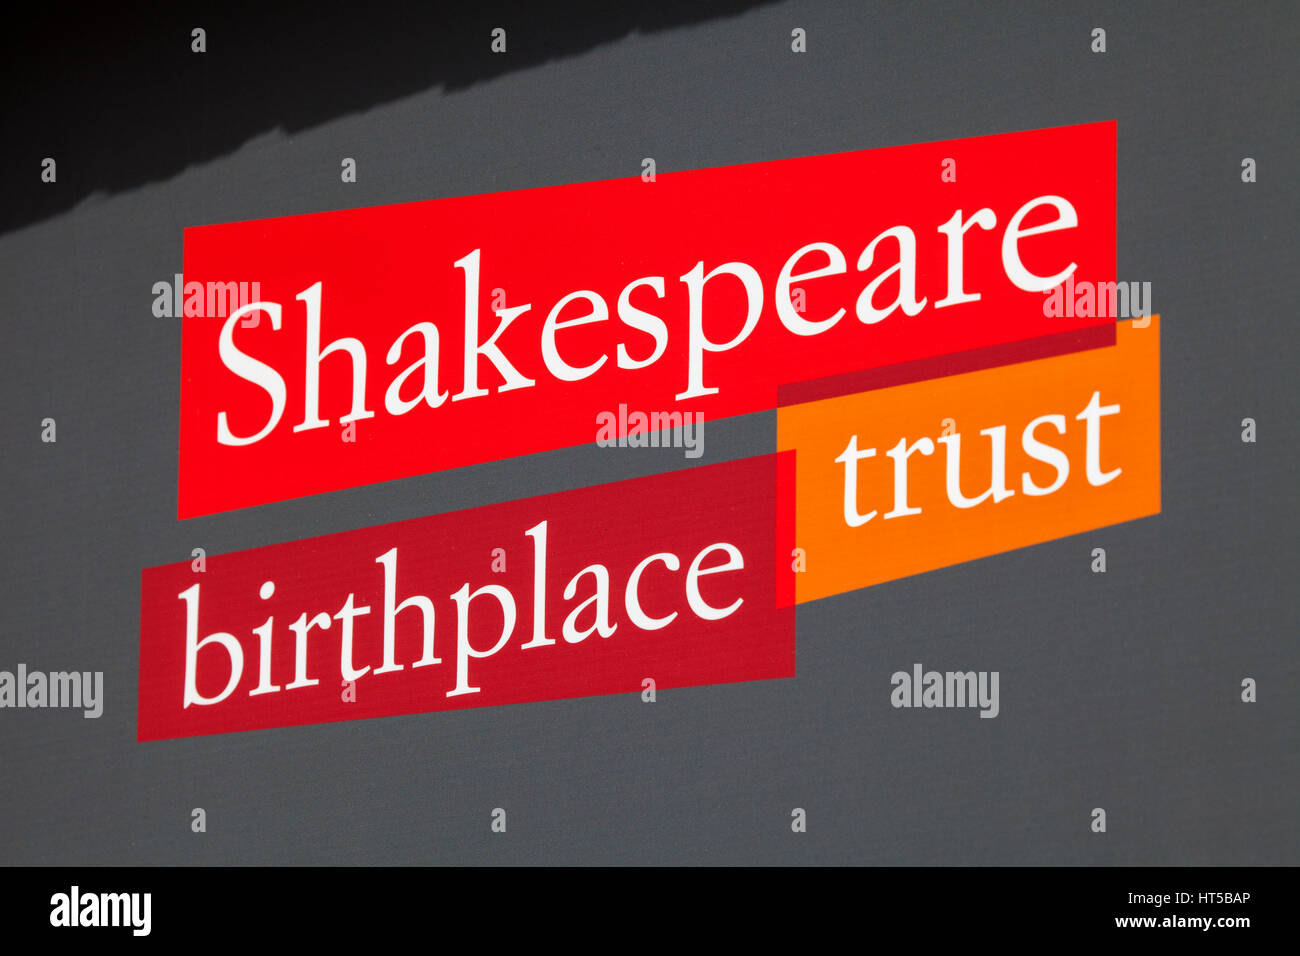 STRATFORD-UPON-ACON, UK - MARCH 2ND 2017: The logo of the Shakespeare Birthplace Trust in the historic town of Stratford-Upon-Avon in the UK, on 2nd M Stock Photo